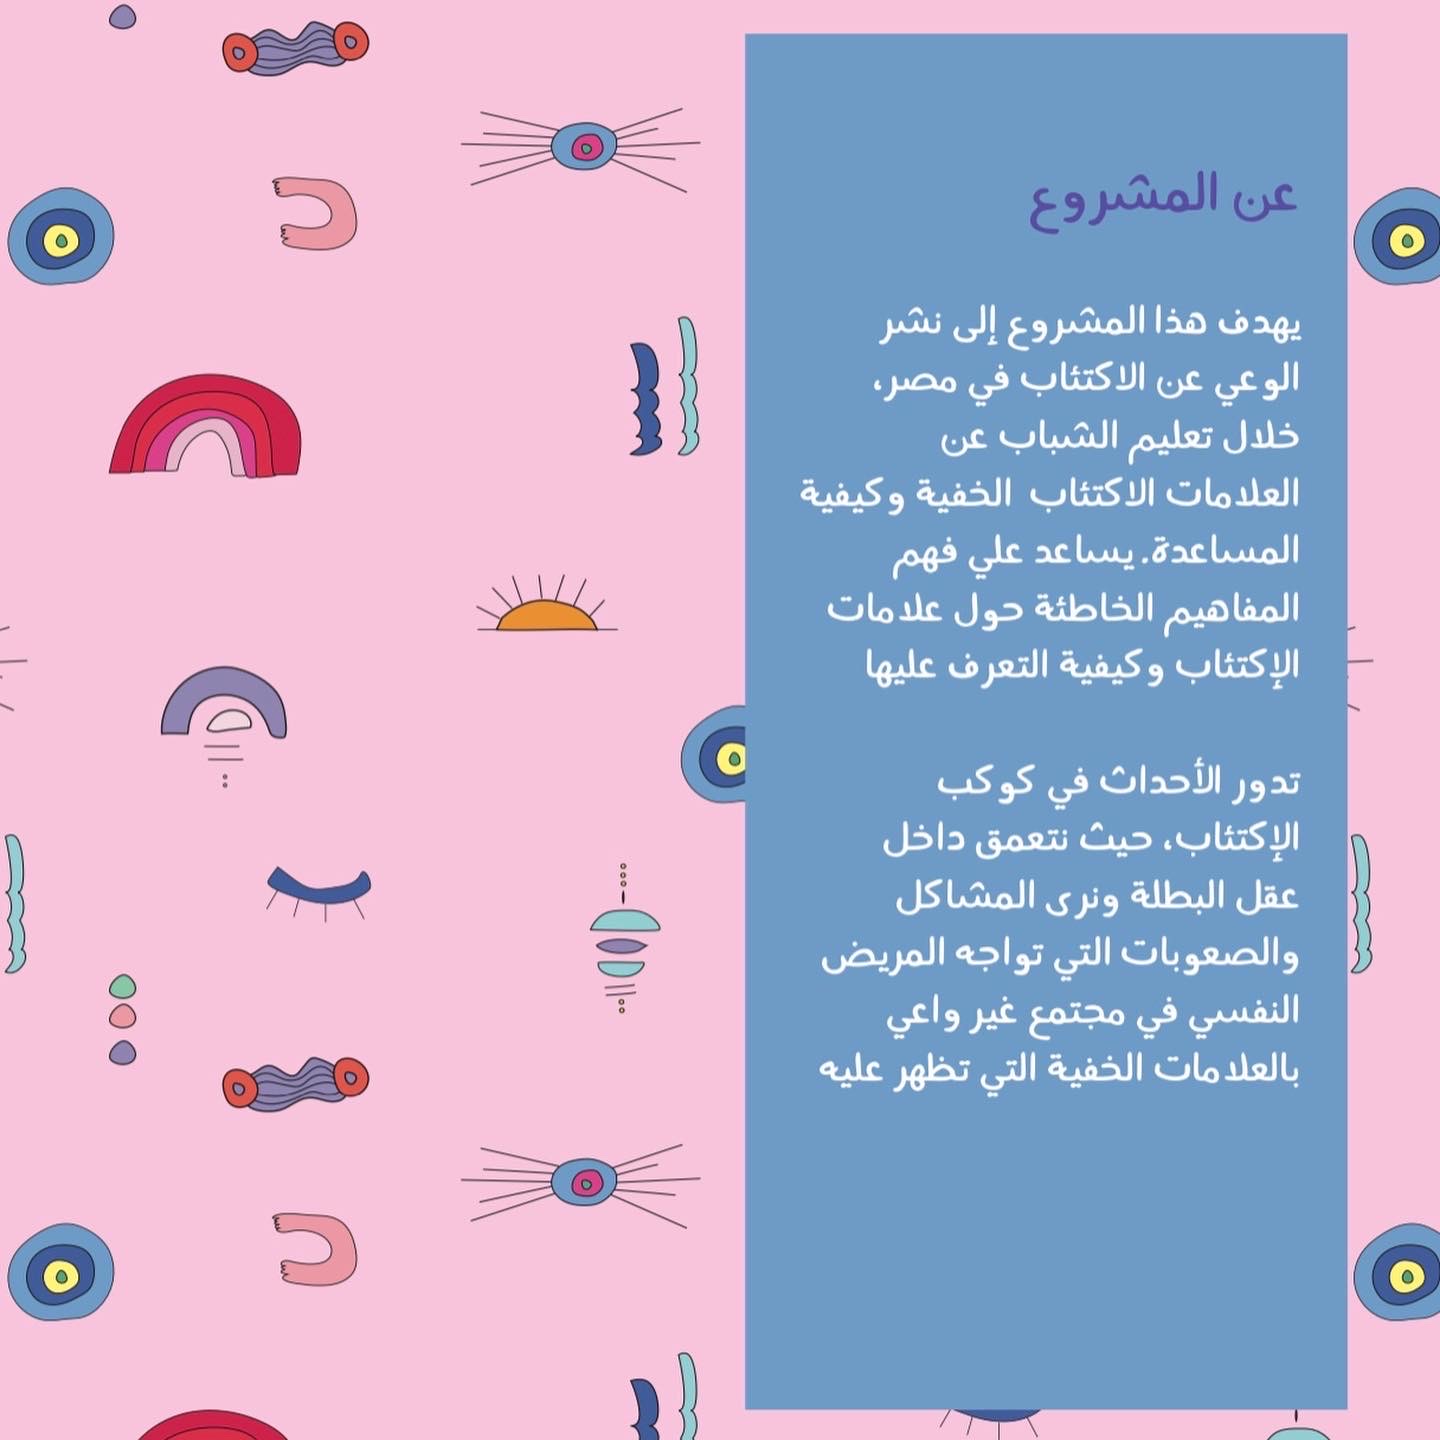 Graphic Design Artwork Poster for Mental Health Awareness with Arabic Content